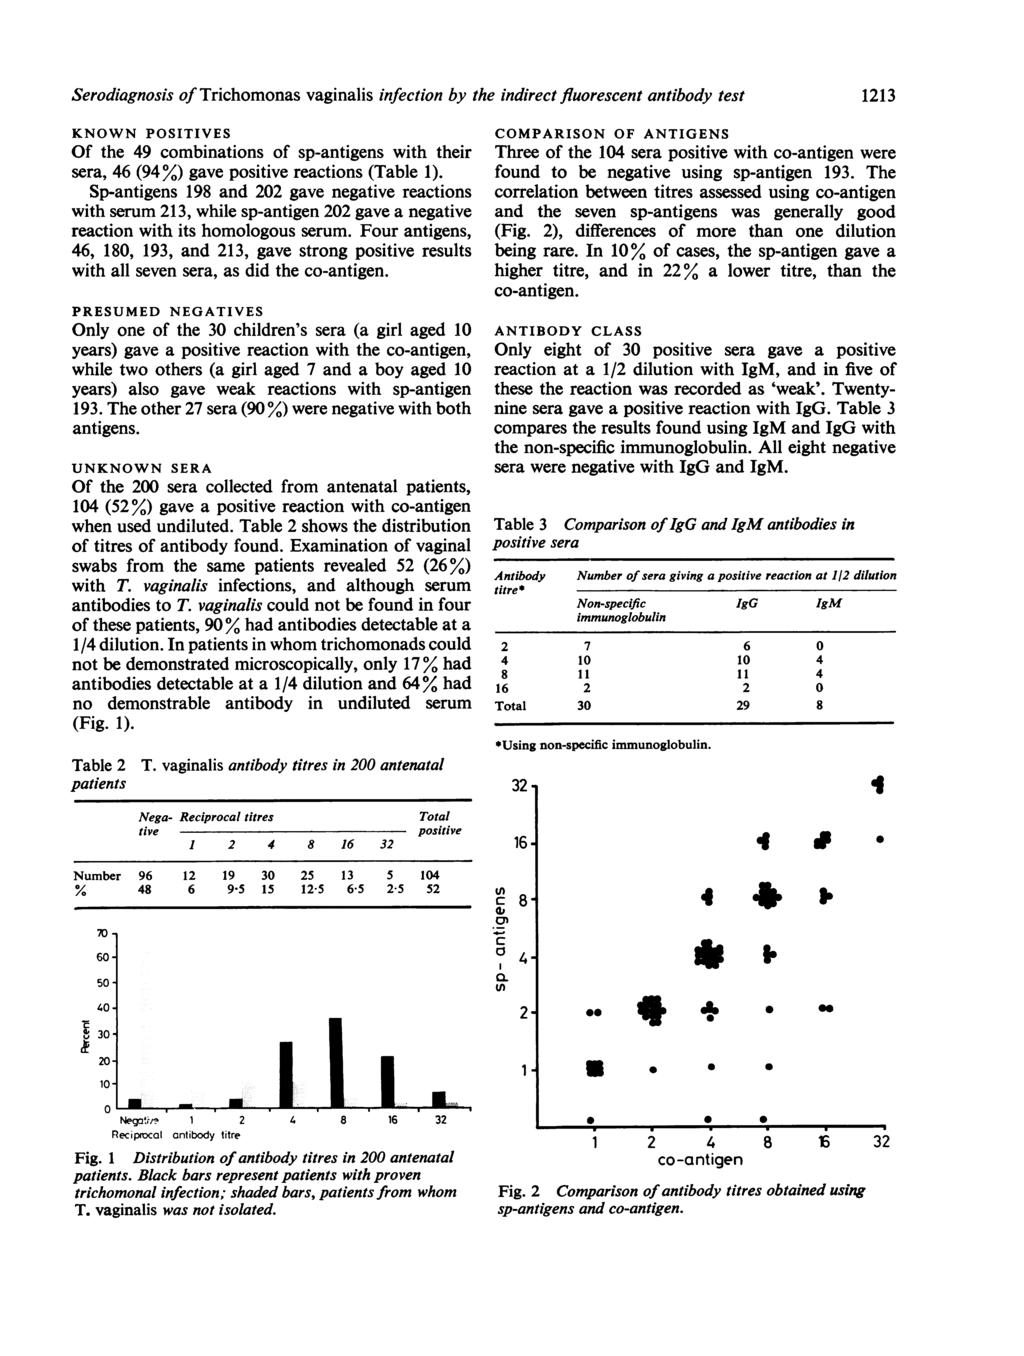 Serodiagnosis of Trichomonas vaginalis infection by the indirect fluorescent antibody test KNOWN POSITIVES Of the 49 combinations of sp-antigens with their sera, 46 (94%) gave positive reactions